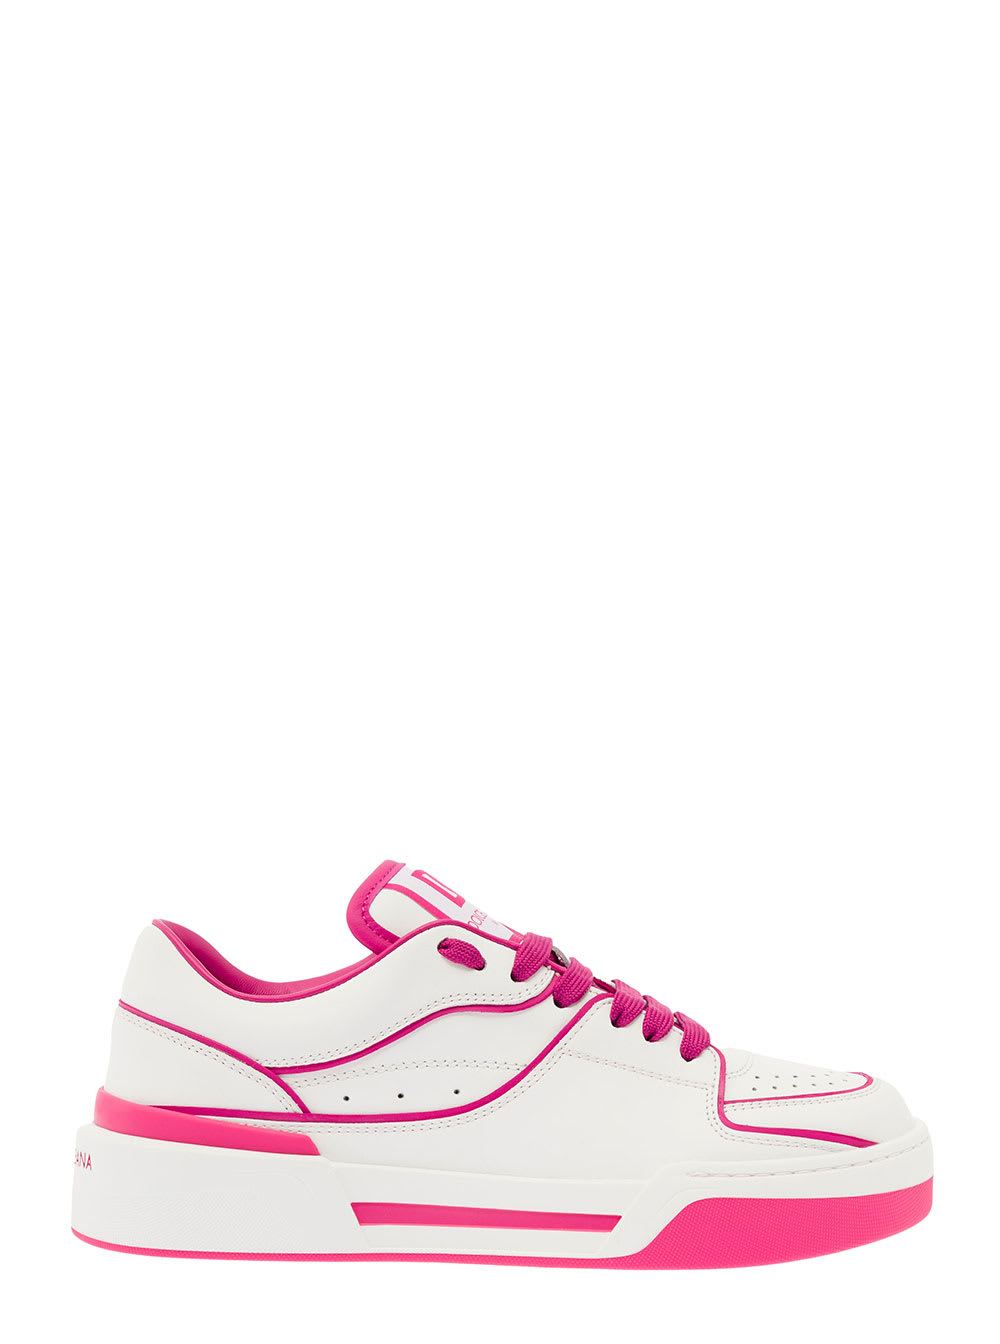 Dolce & Gabbana new Roma Fuchsia And White Sneakers With Contrasting 3d Details Woman Dolce & Gabbana